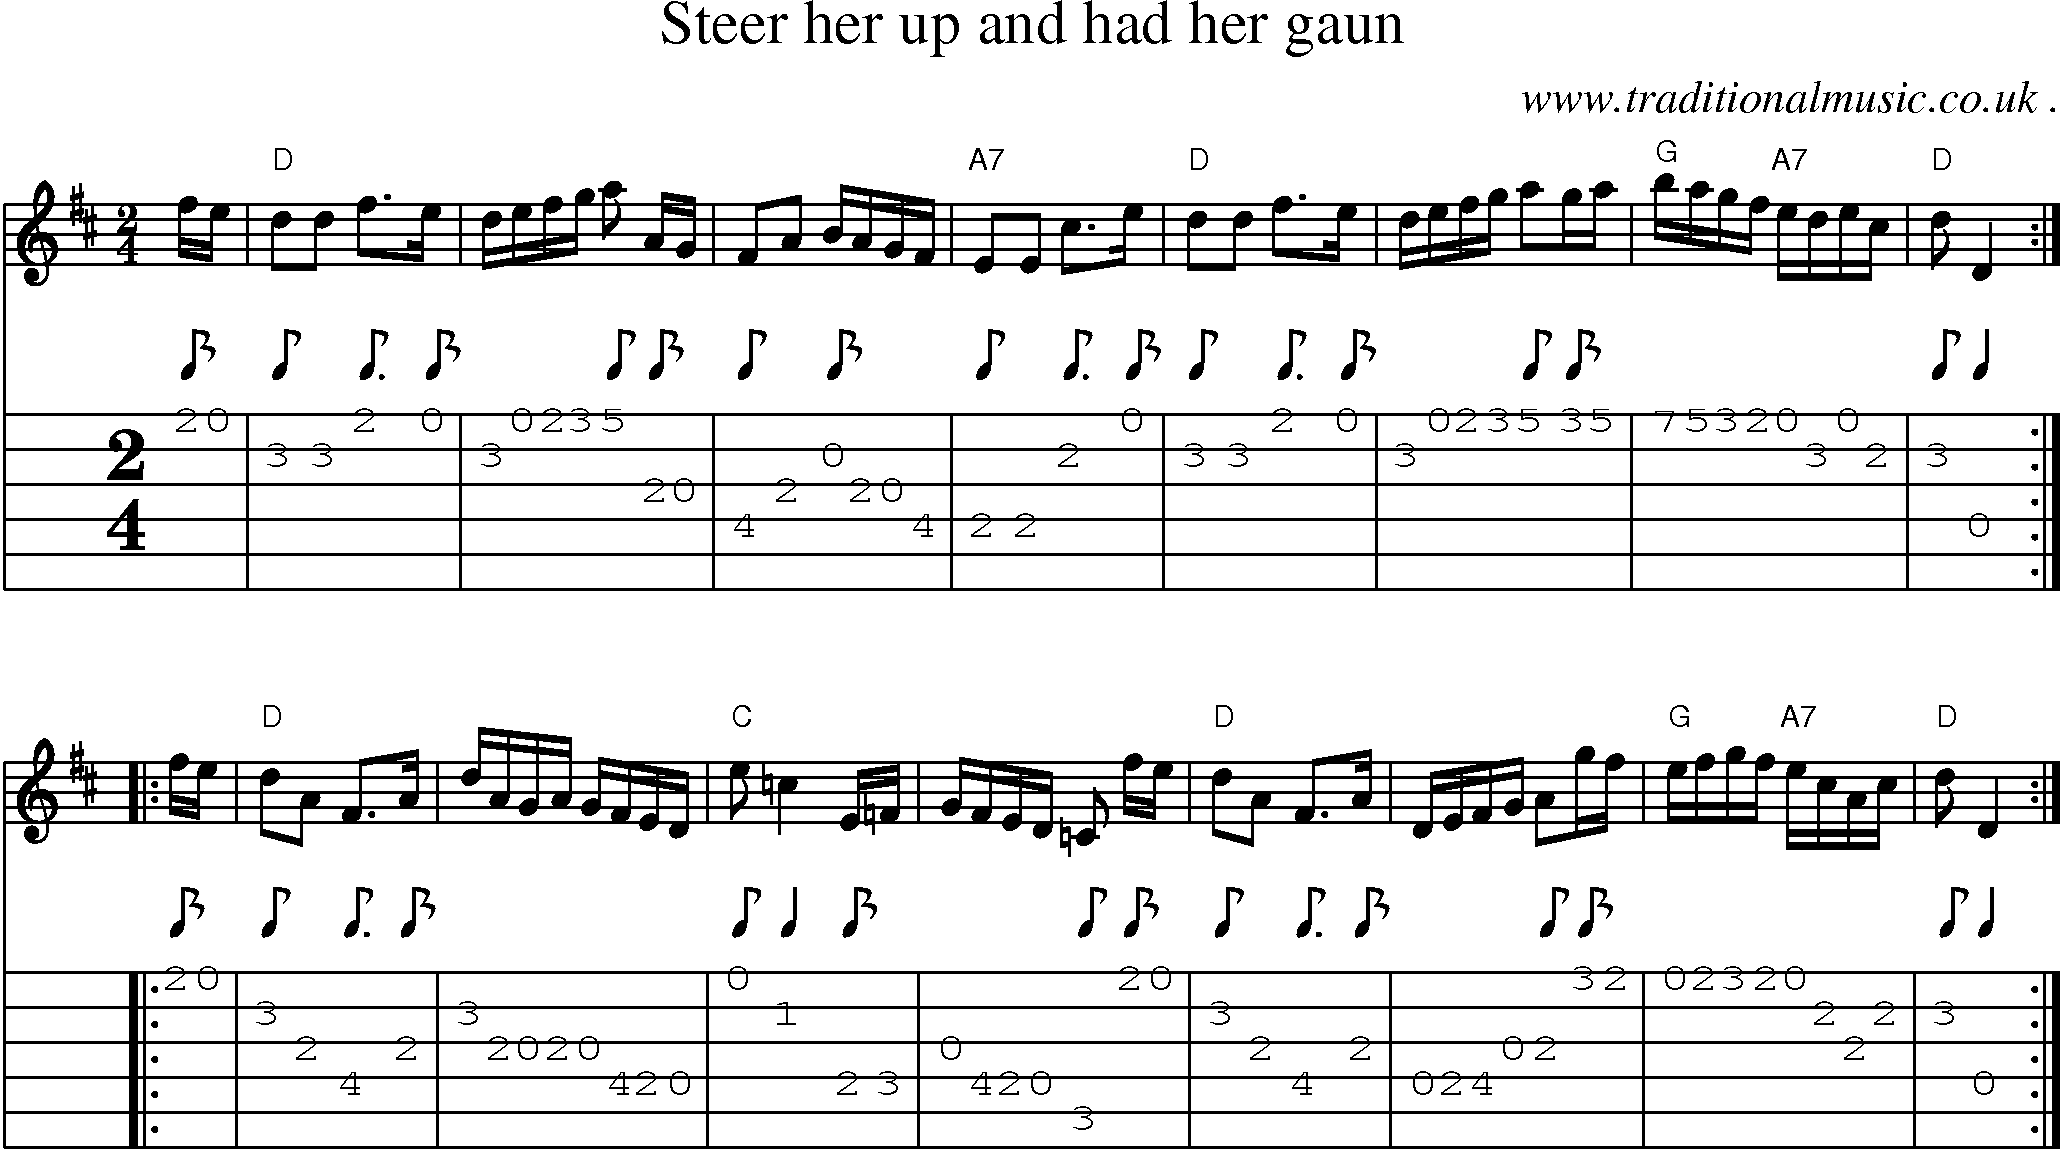 Sheet-music  score, Chords and Guitar Tabs for Steer Her Up And Had Her Gaun